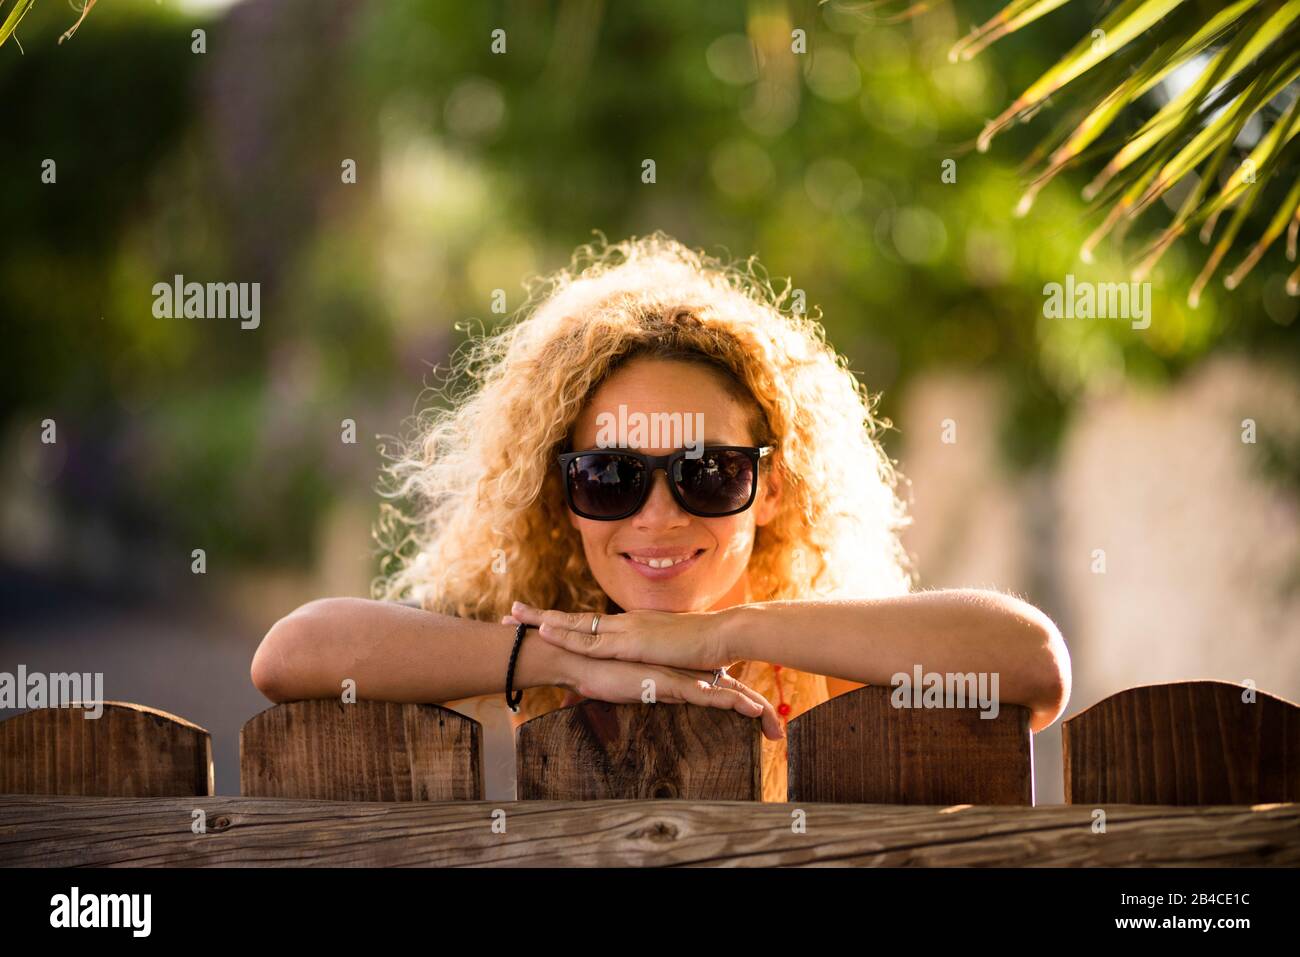 Portrait of beautiful caucasian young blonde curly woman cheerful looking at the camera with sun lights in background and defocused green natural outdoor background - happy middle age lady concept Stock Photo